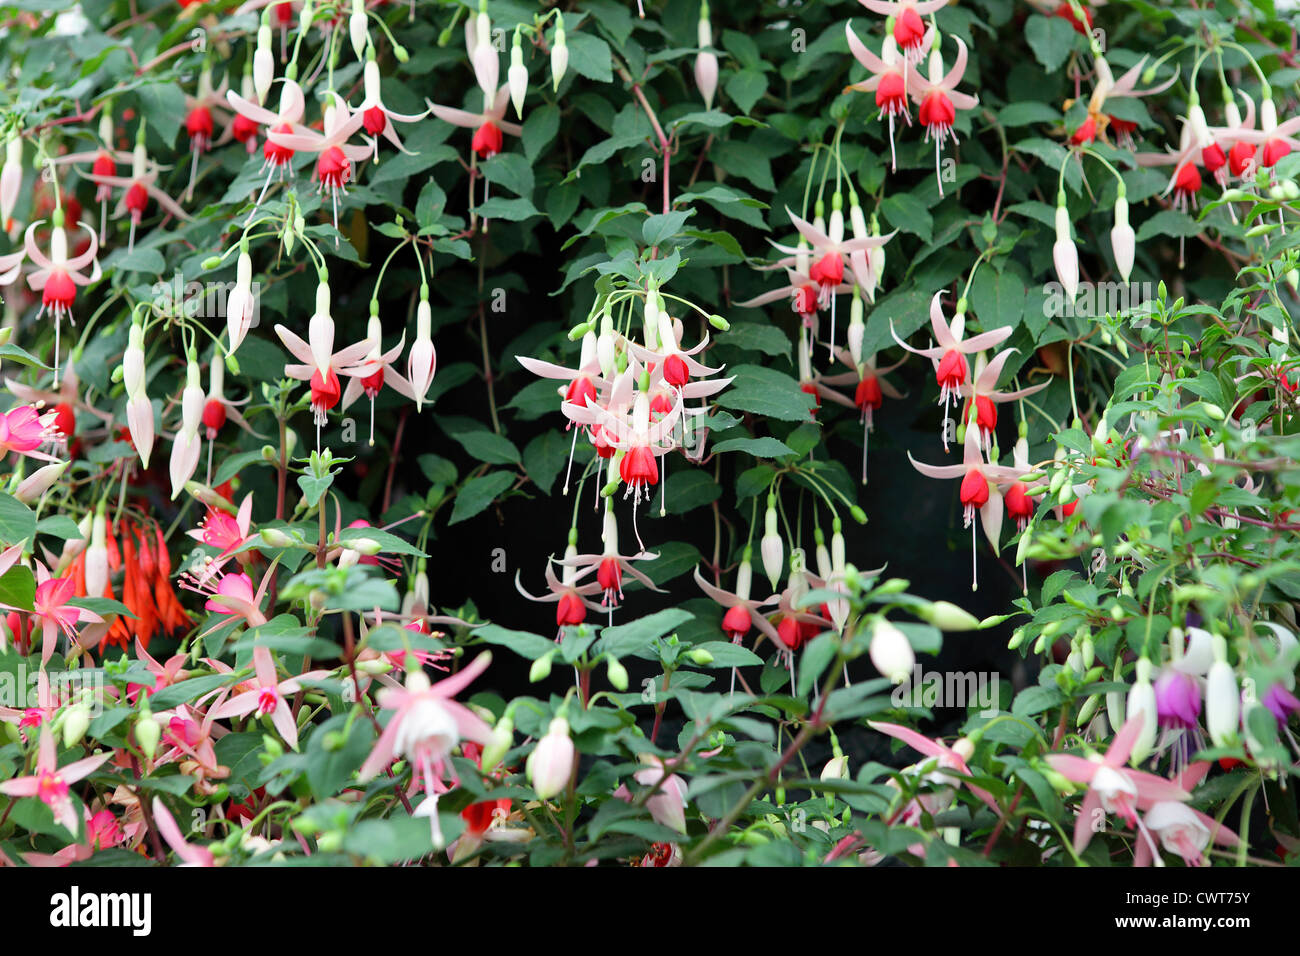 Set against a rich green foliated background is this wonderful collection of fuchsia flower heads. Stock Photo